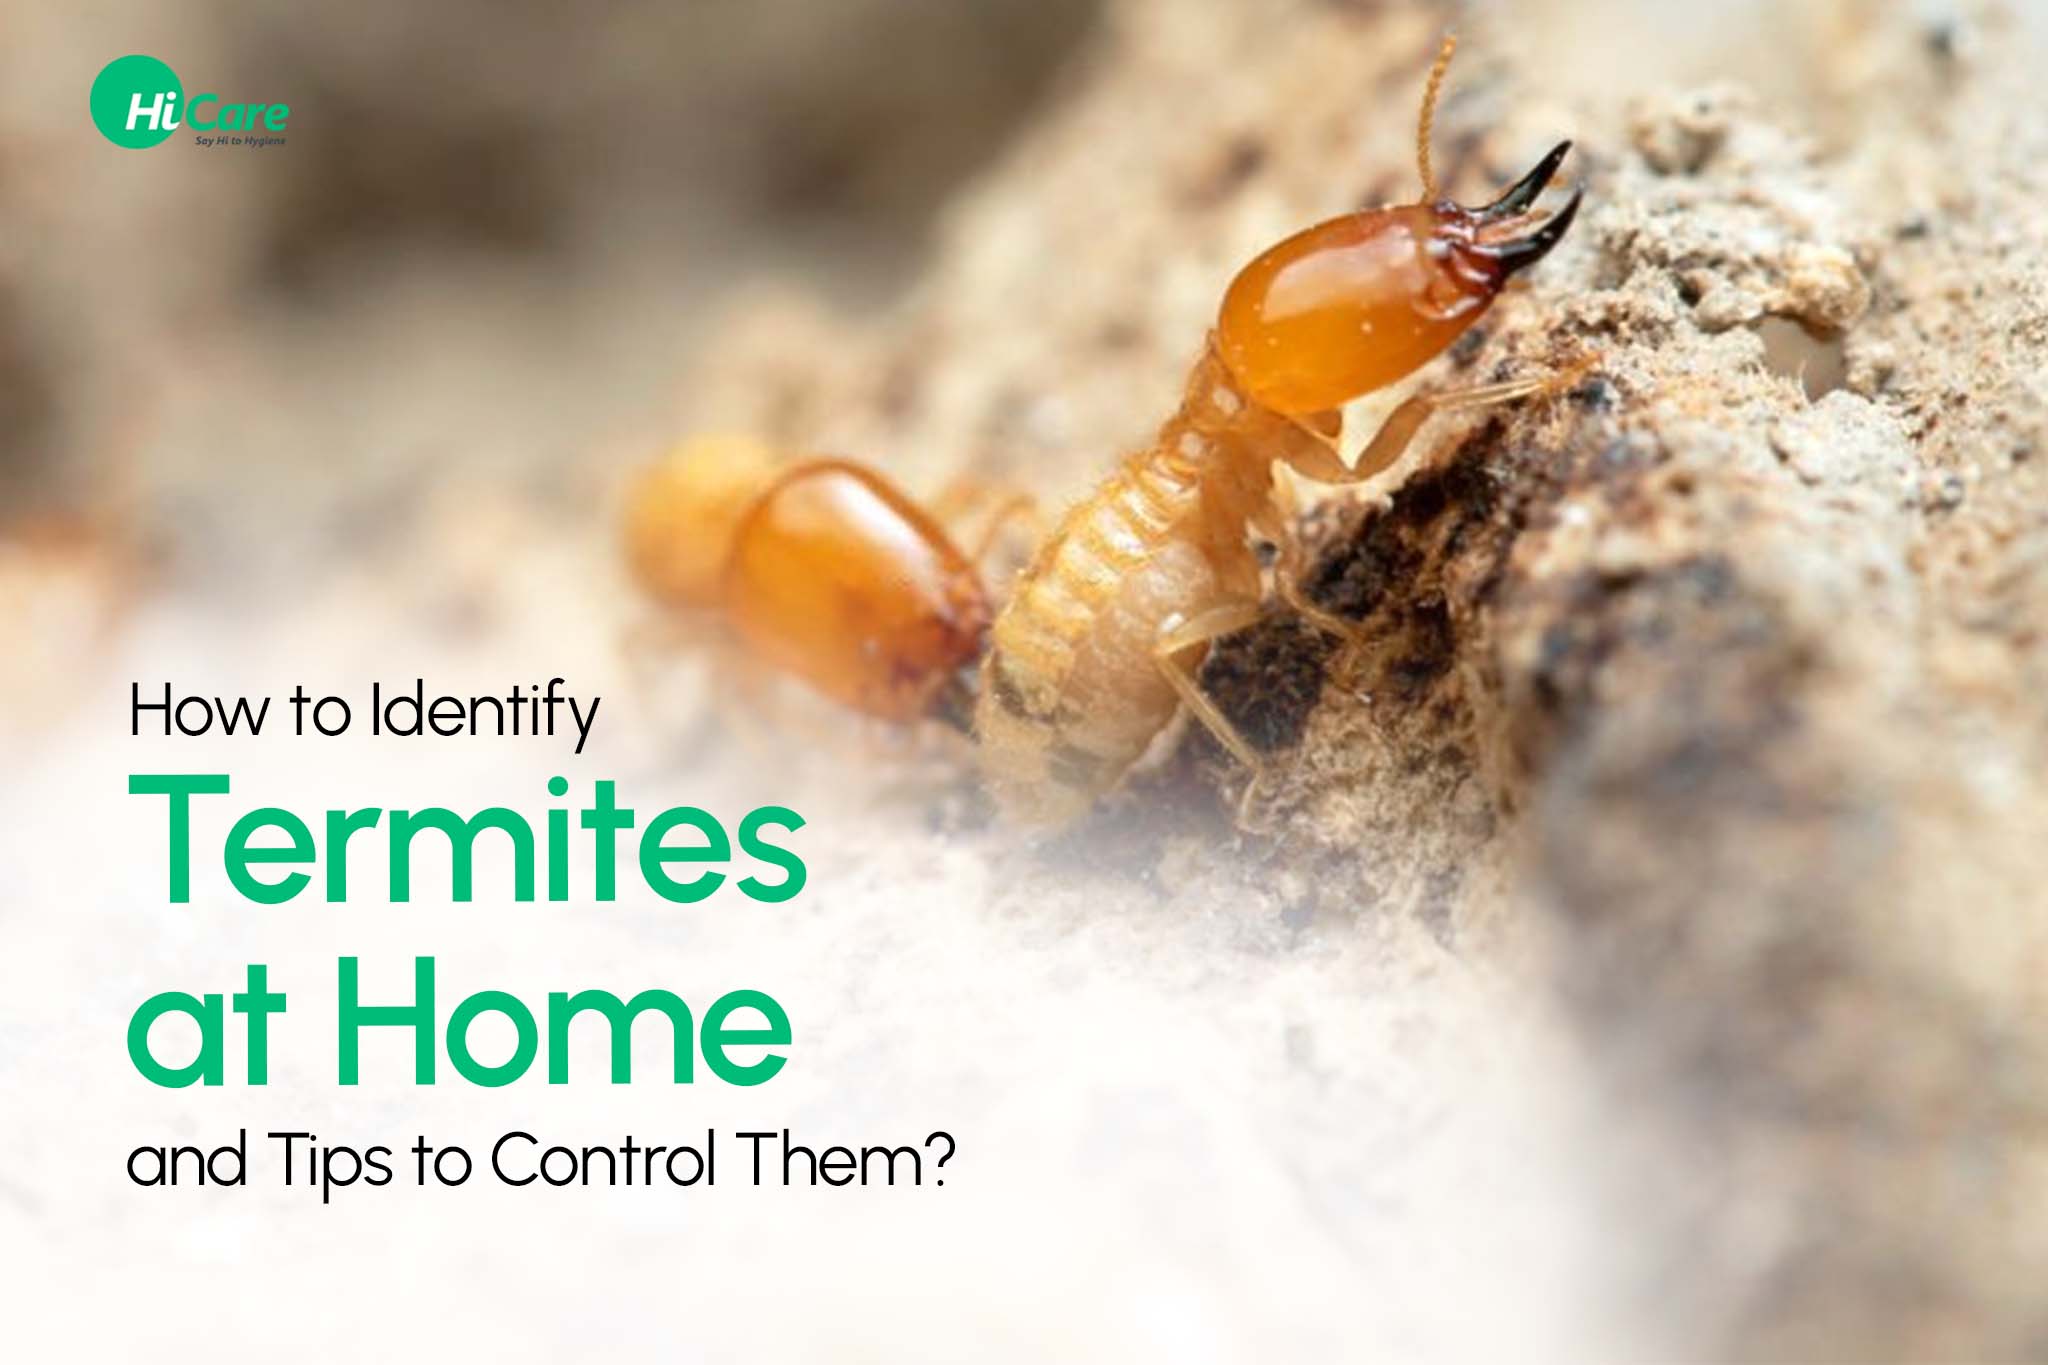 How to Identify Termites at Home and Tips to Control Them?